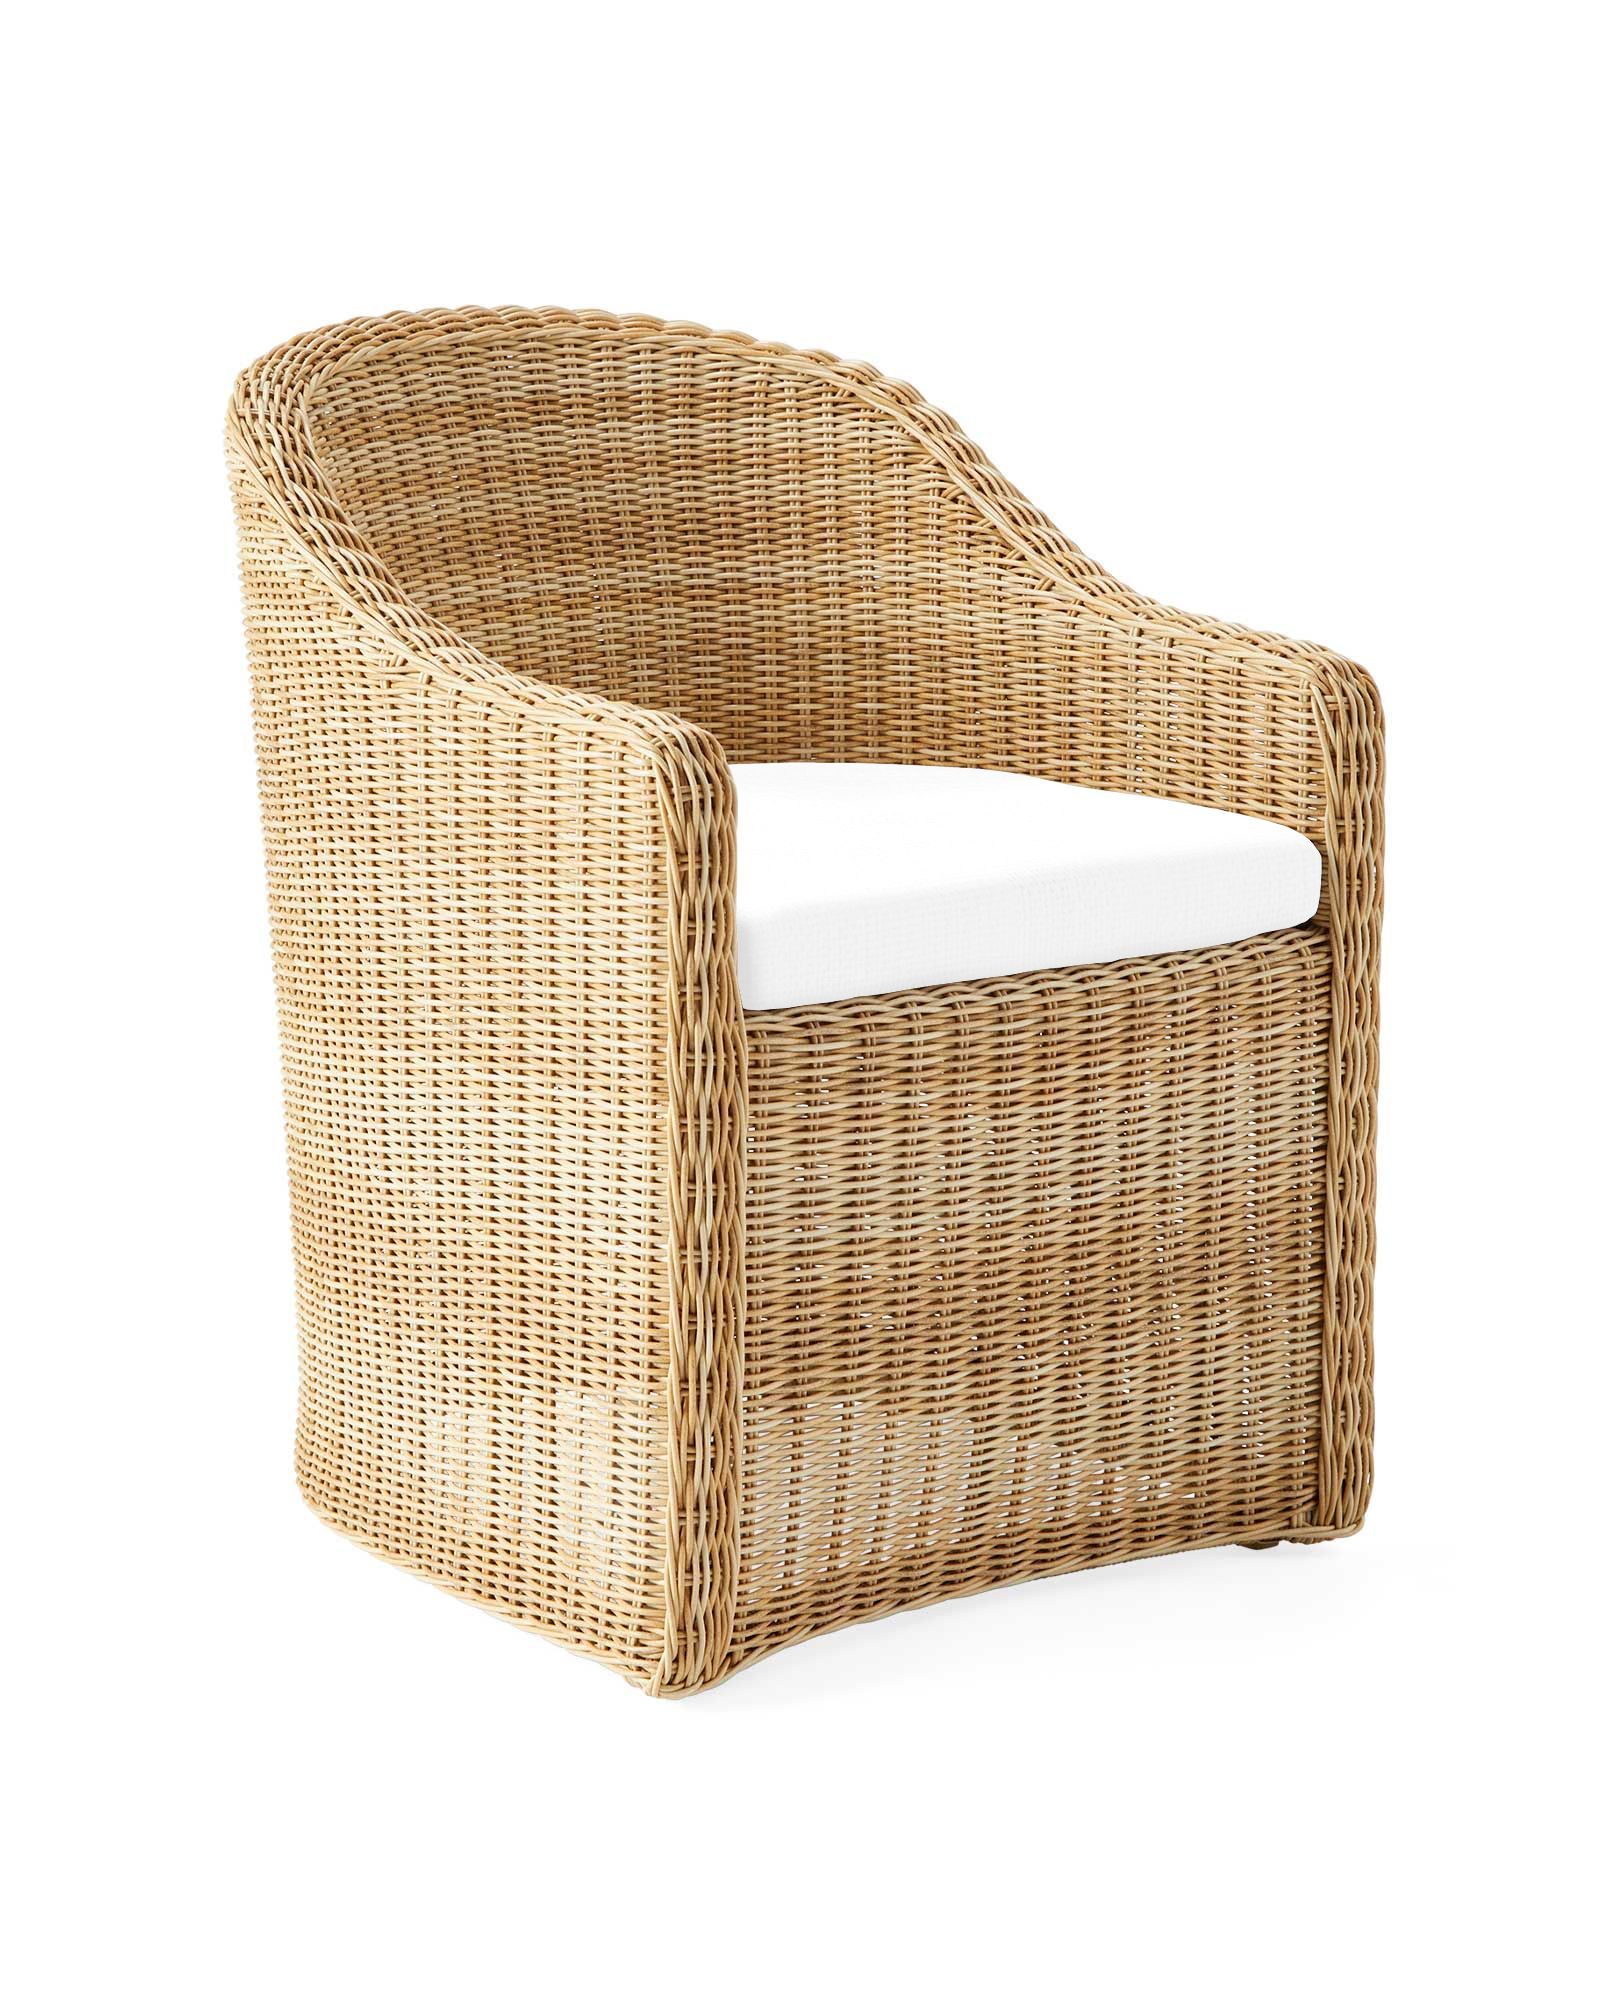 Tofino Dining Chair | Serena and Lily